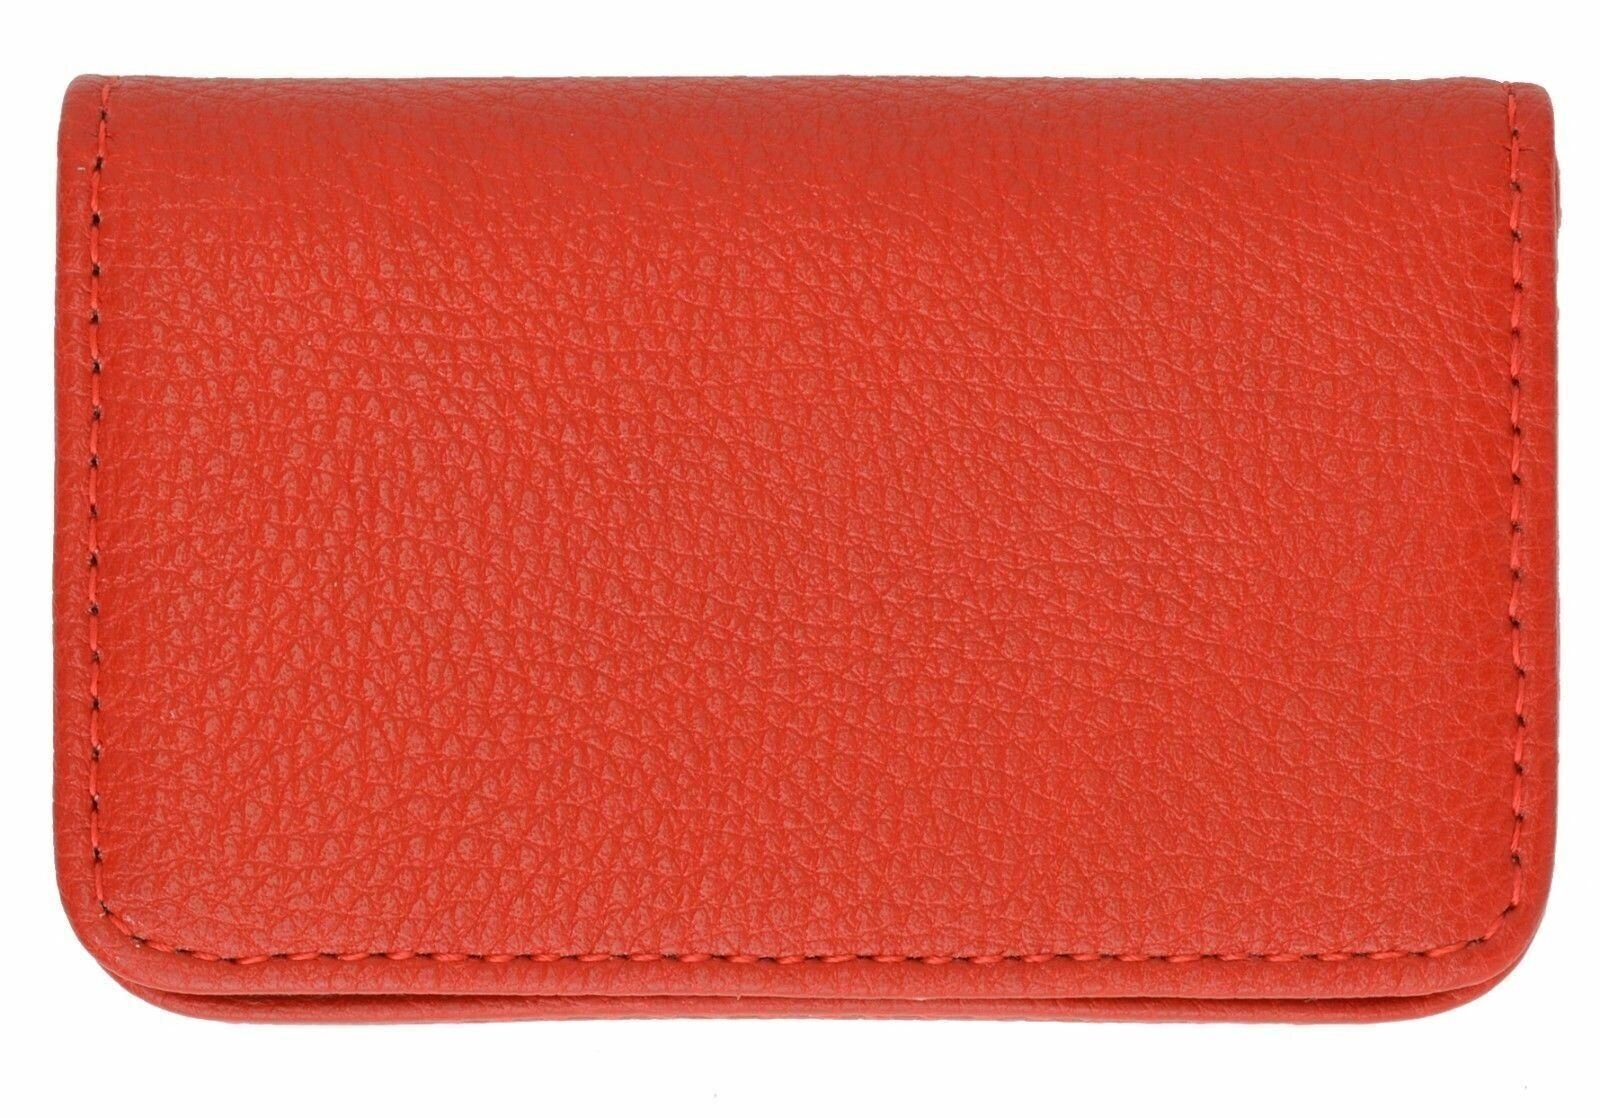 New Red Pocket PU Leather Business ID Credit Card Holder Case Wallet